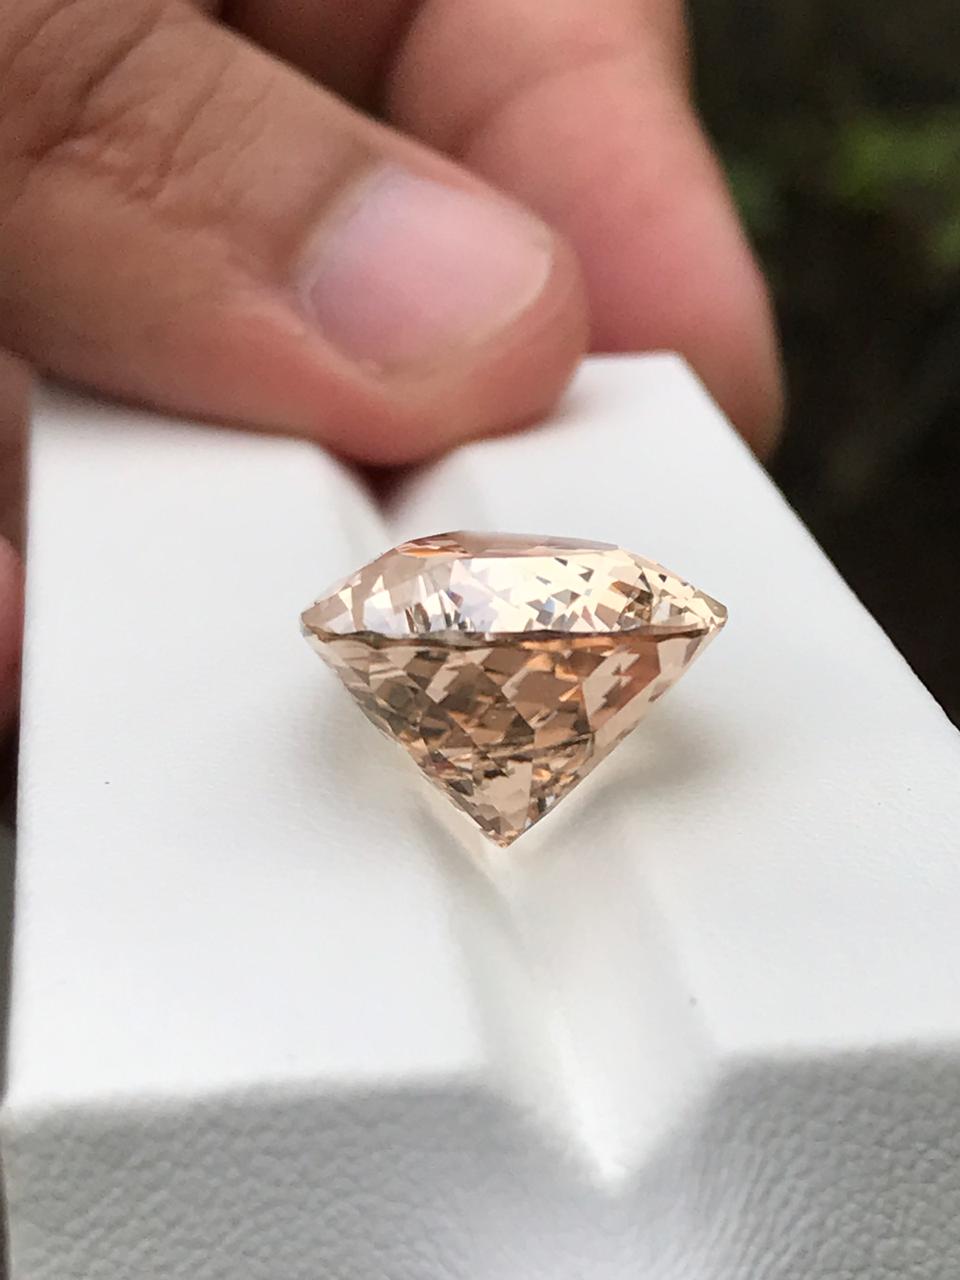 Gorgeous Morganite Color Faceted available for sale